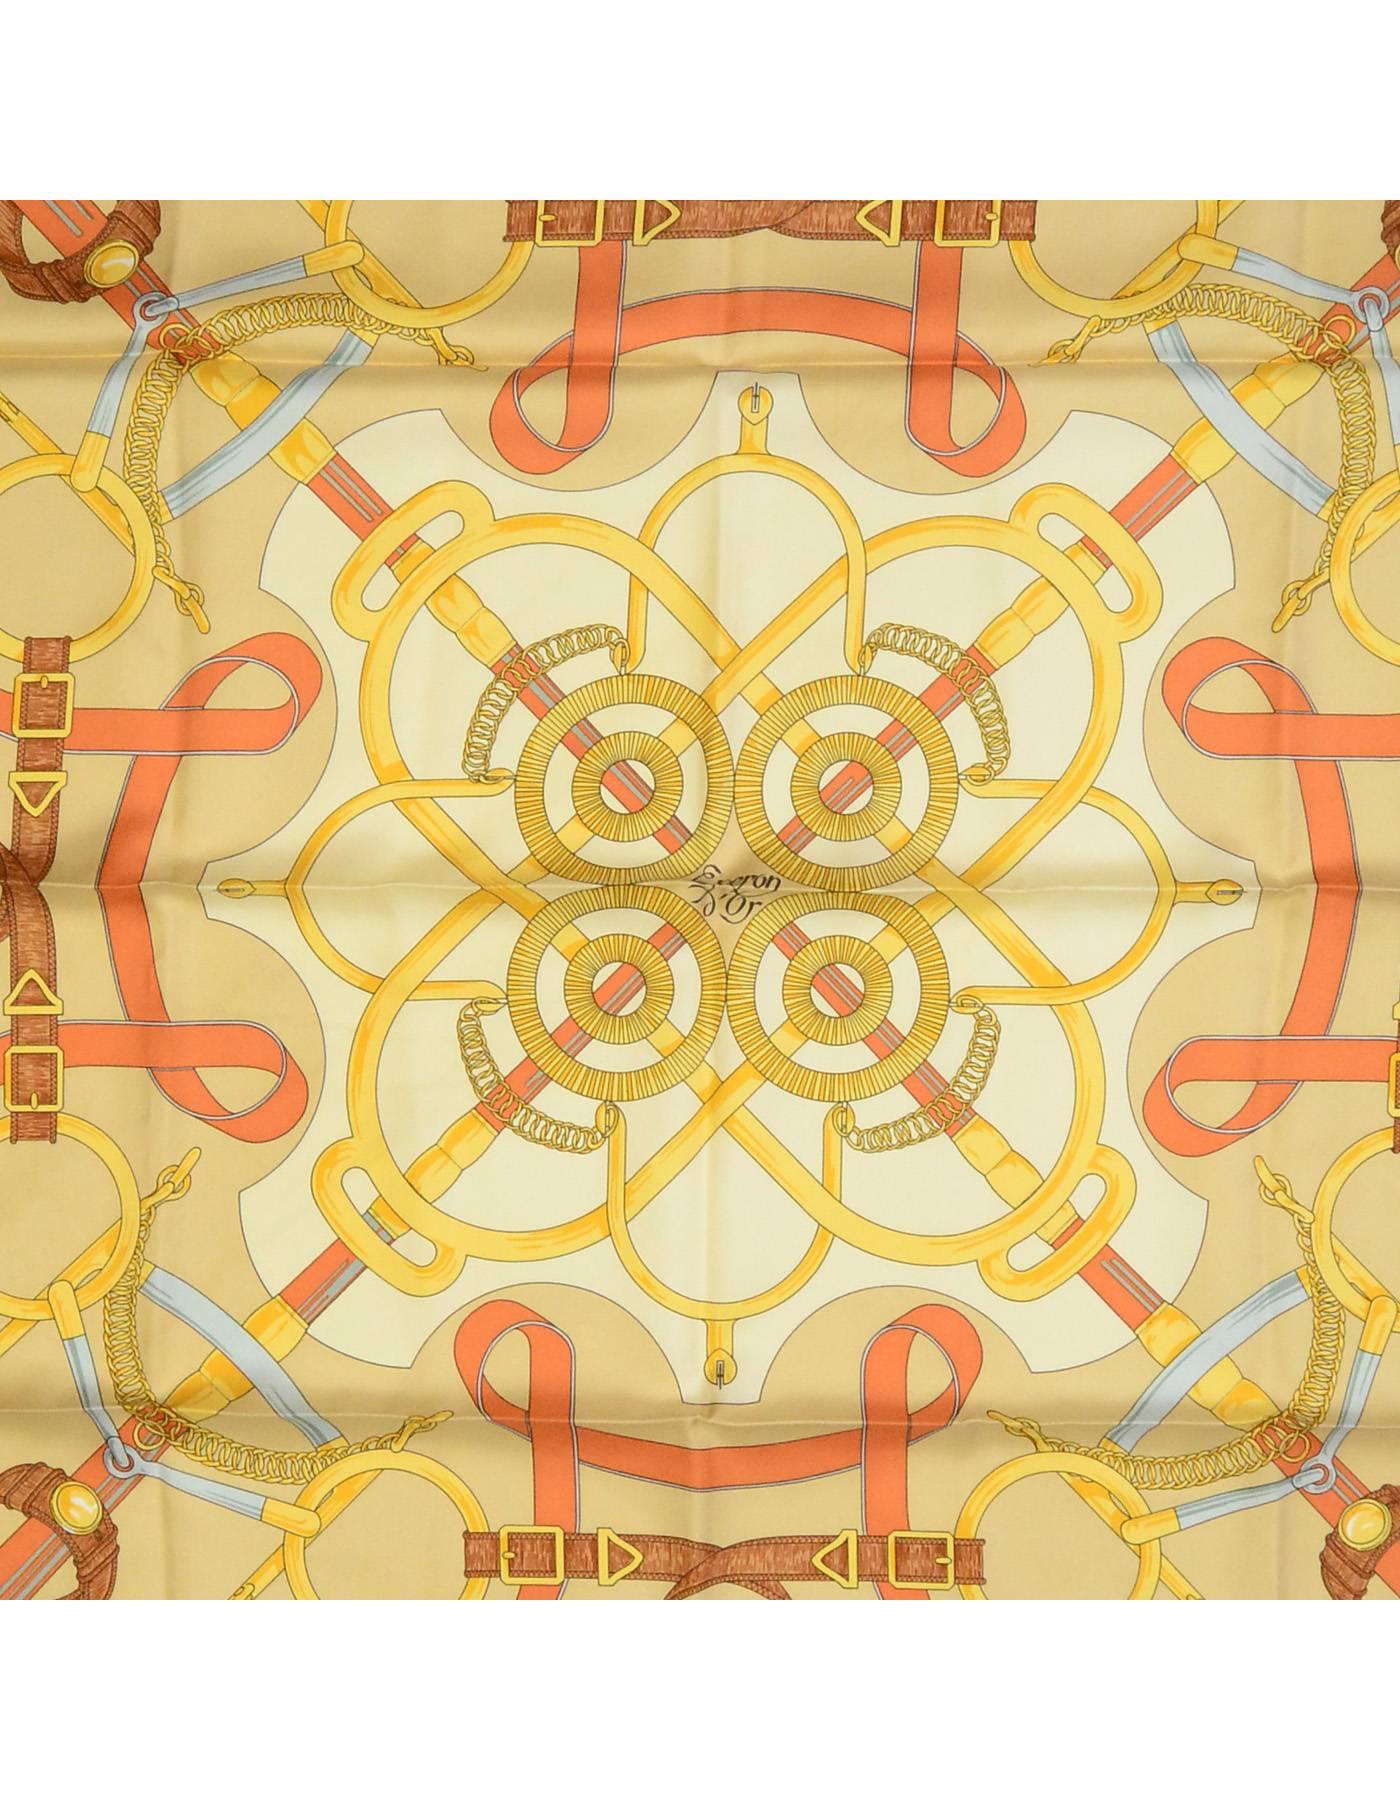 Hermes Gold Epron D'Or Silk 90cm Scarf

Made In: France
Color: Gold, light yellow
Composition: 100% Silk
Retail Price: $395 + tax
Overall Condition: Excellent pre-owned condition
Included: Hermes box

Measurements:
Length: 35"
Width: 35"